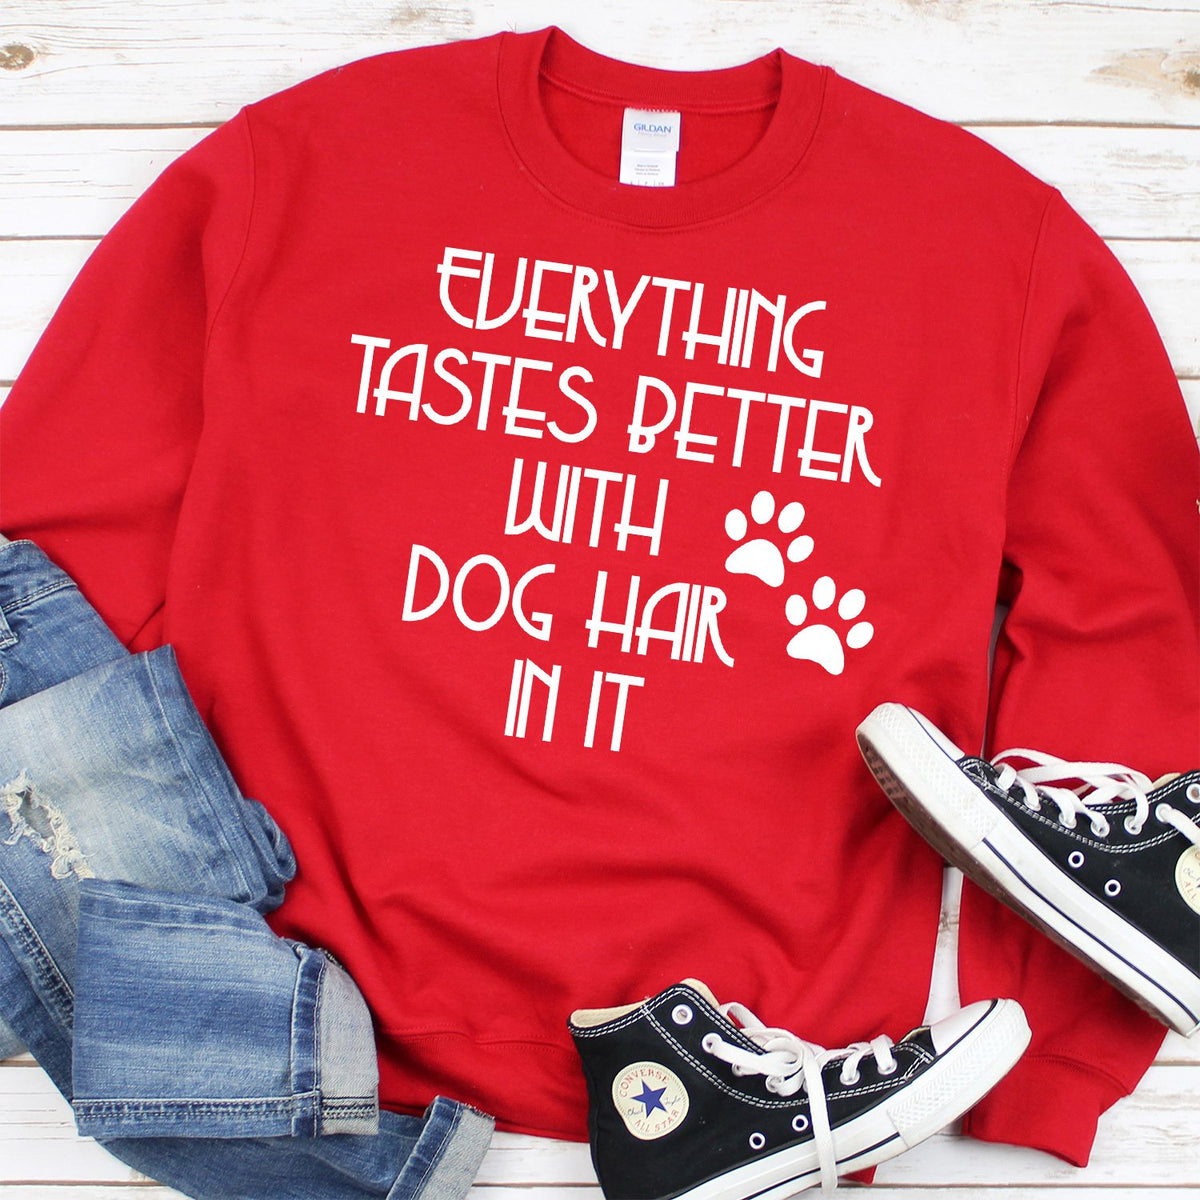 Everything Tastes Better with Dog Hair in It - Long Sleeve Heavy Crewneck Sweatshirt